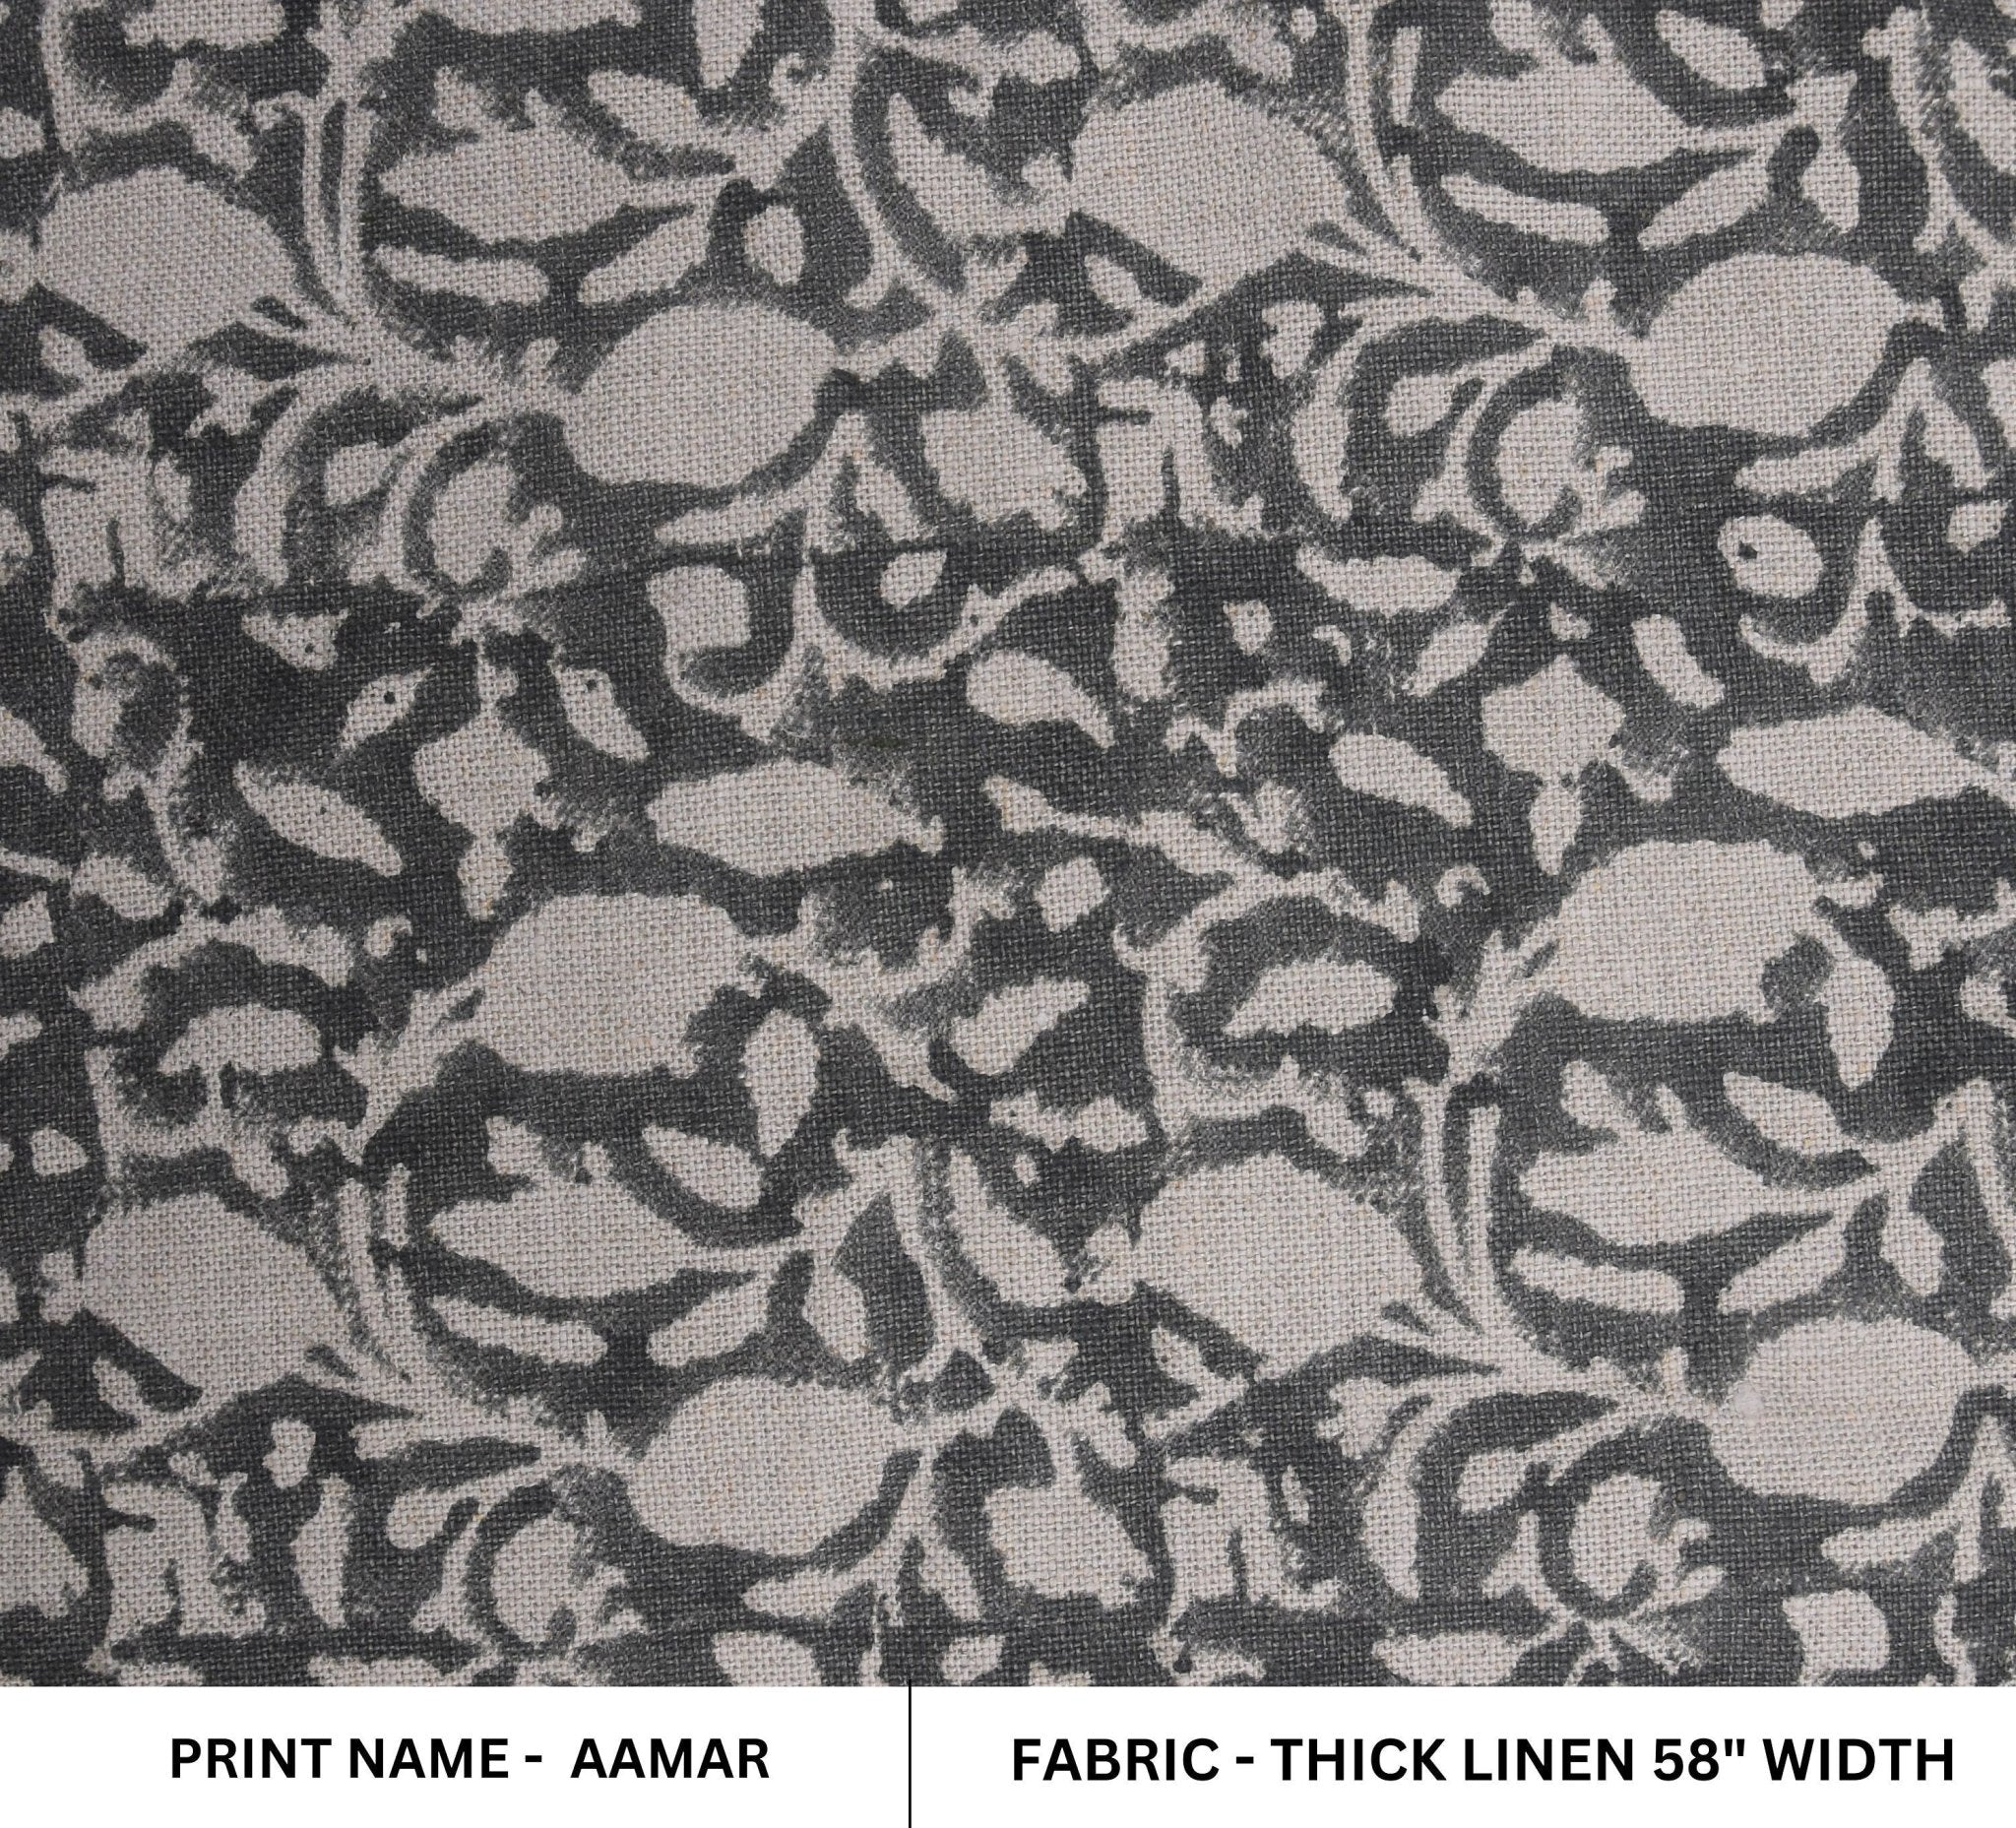 Hand Block Print, Thick Linen 58" Wide, floral fabric, Leaf Print, linen curtains, Home Decor, Indian Fabric - Aamar